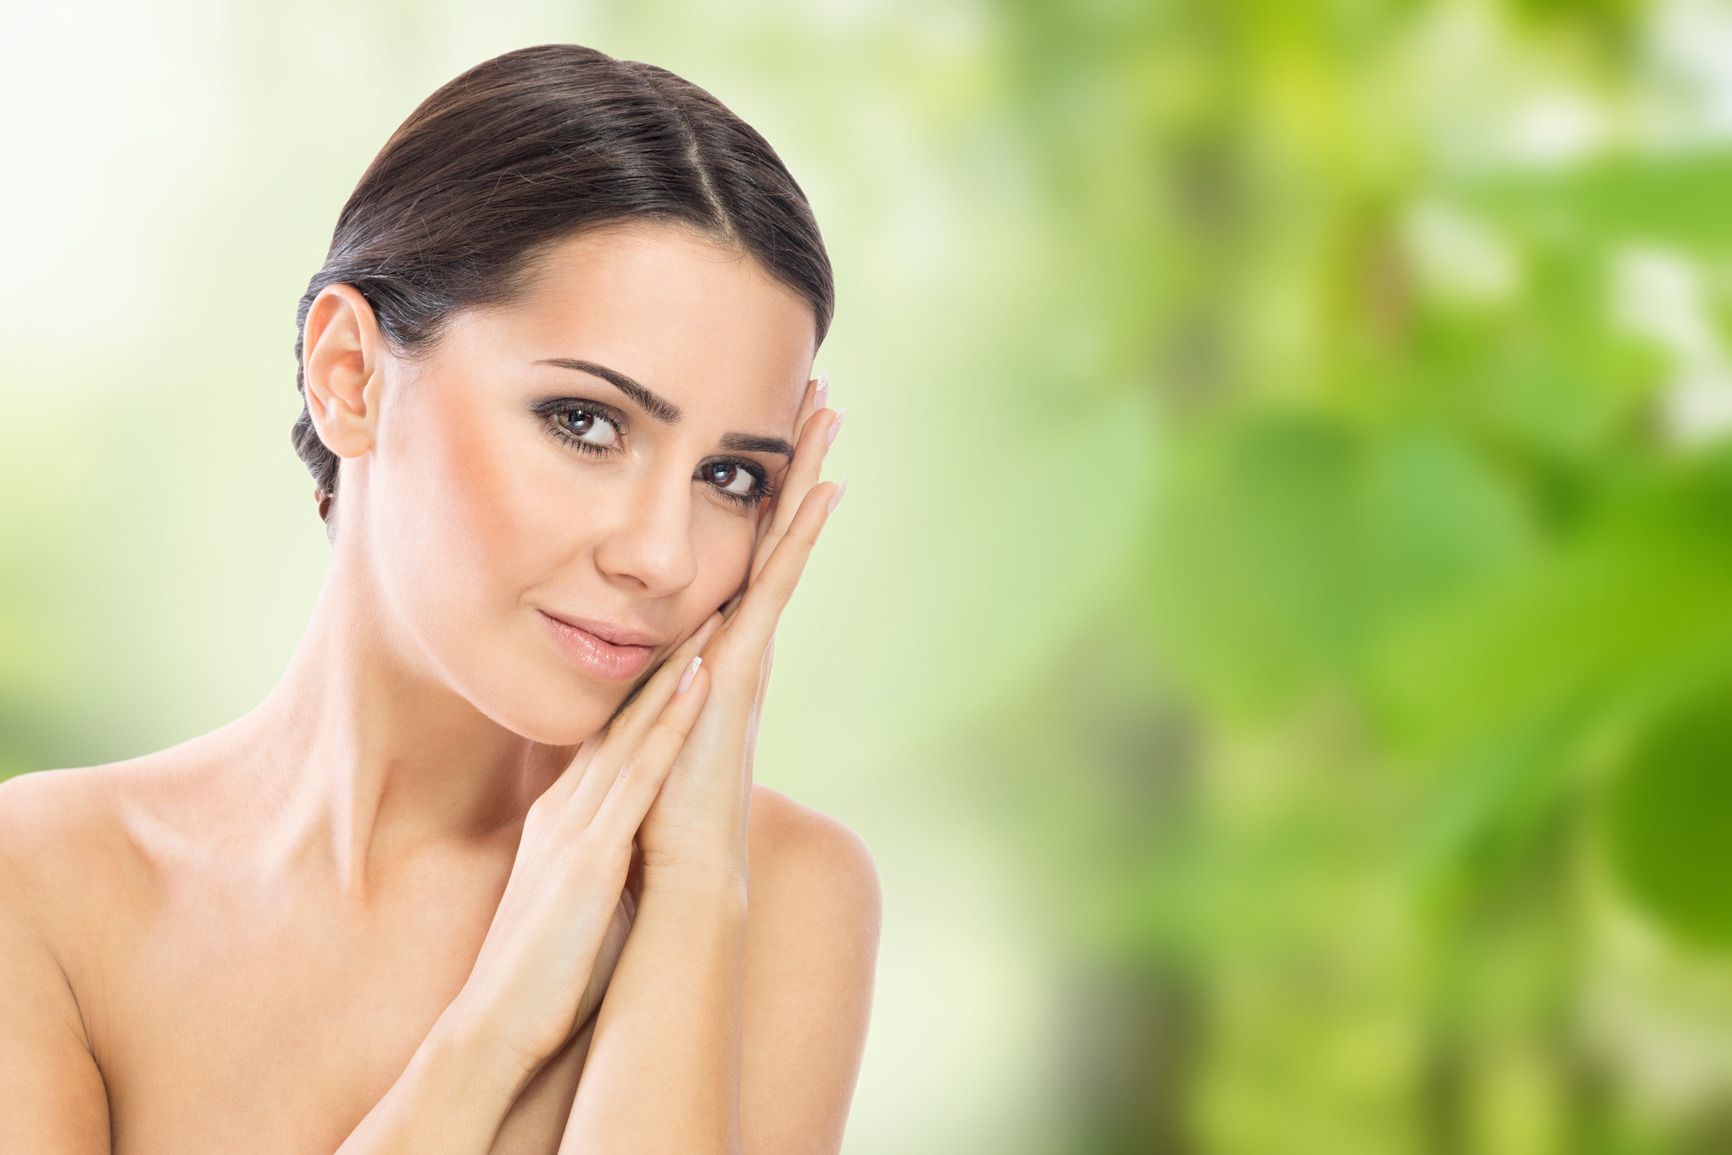 What to Look for in Good Natural Skin Care Products